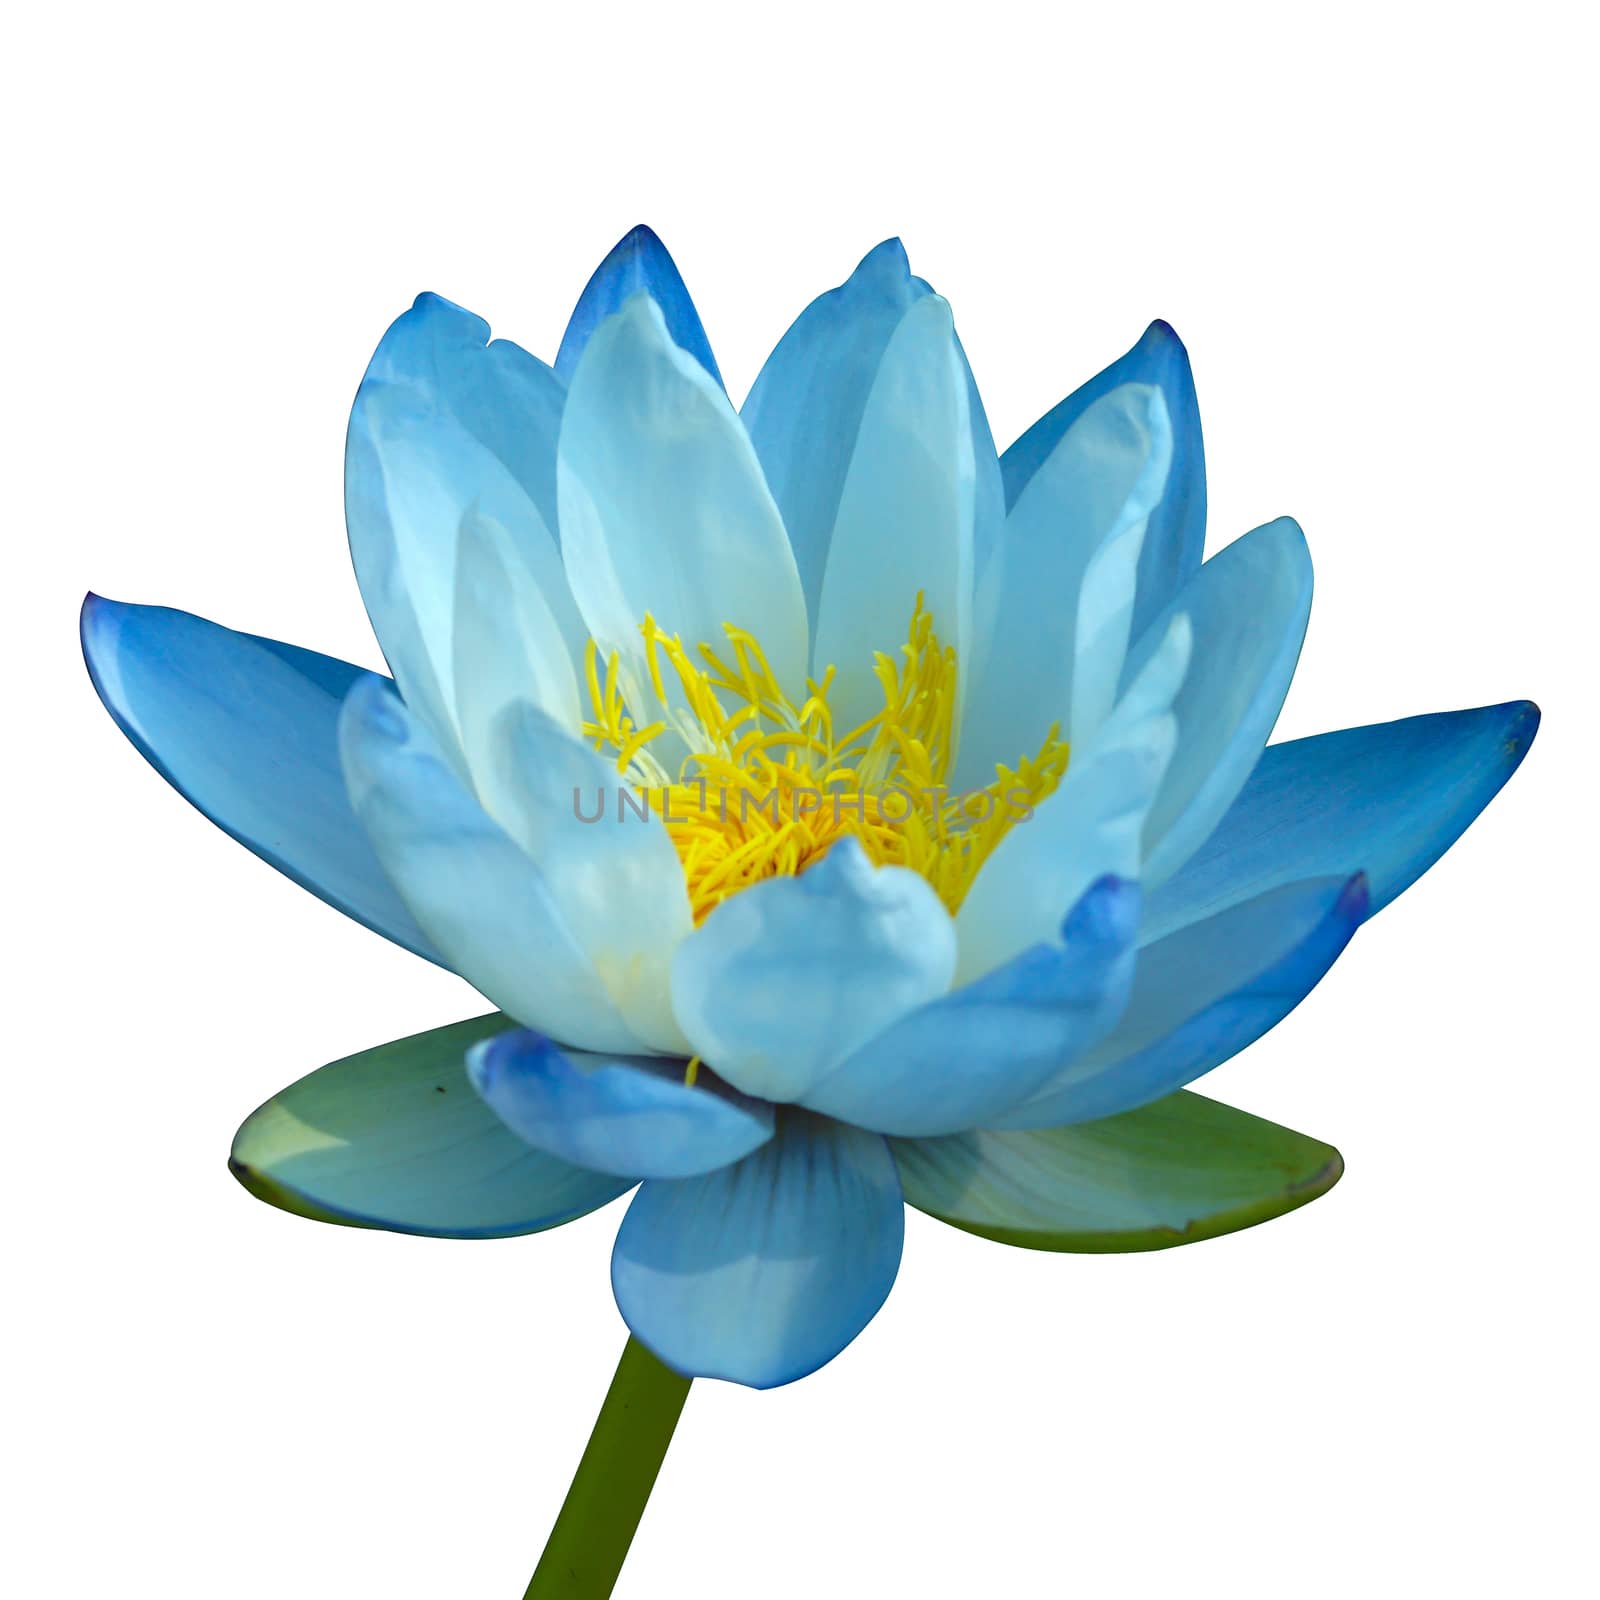 Blue water lily isolate on white background. by Noppharat_th